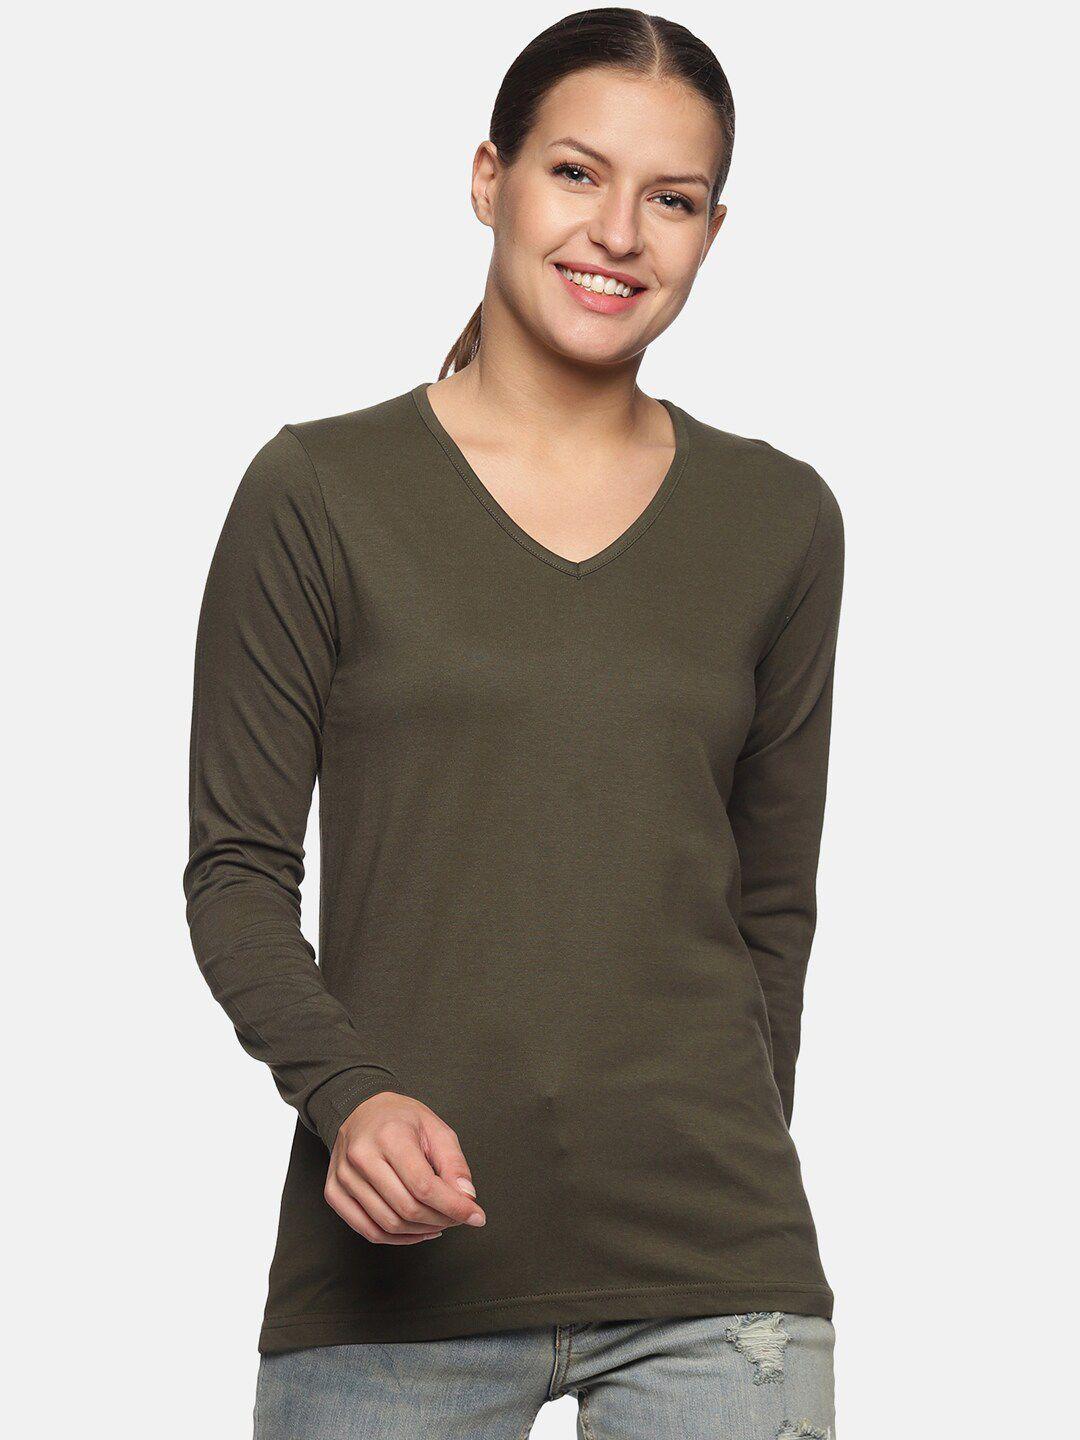 trends-tower-women-olive-green-v-neck-pure-cotton-t-shirt